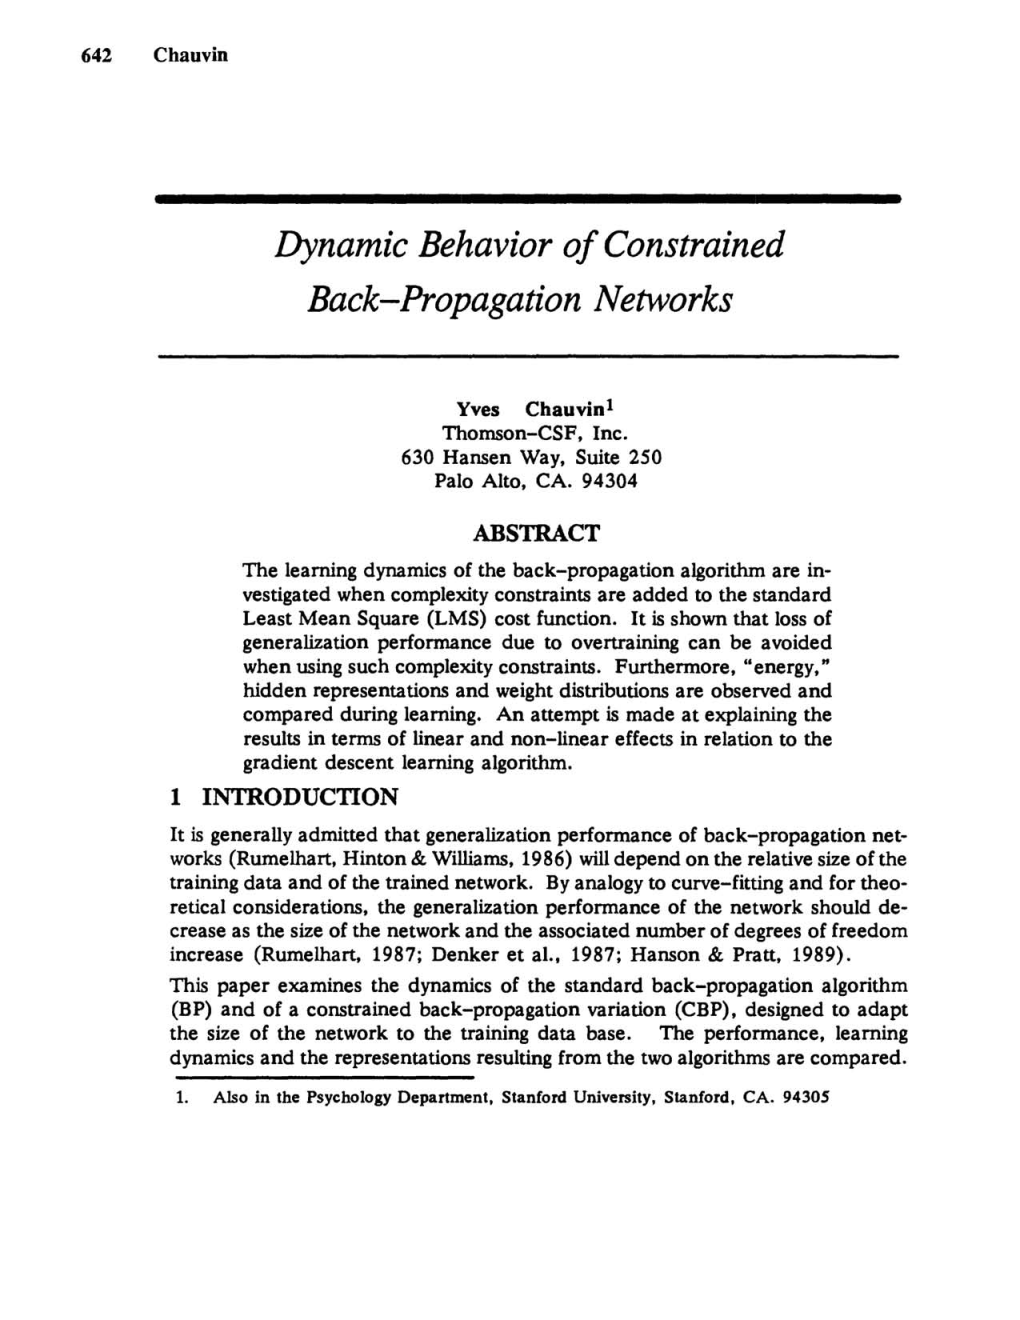 Dynamic Behavior of Constained Back-Propagation Networks